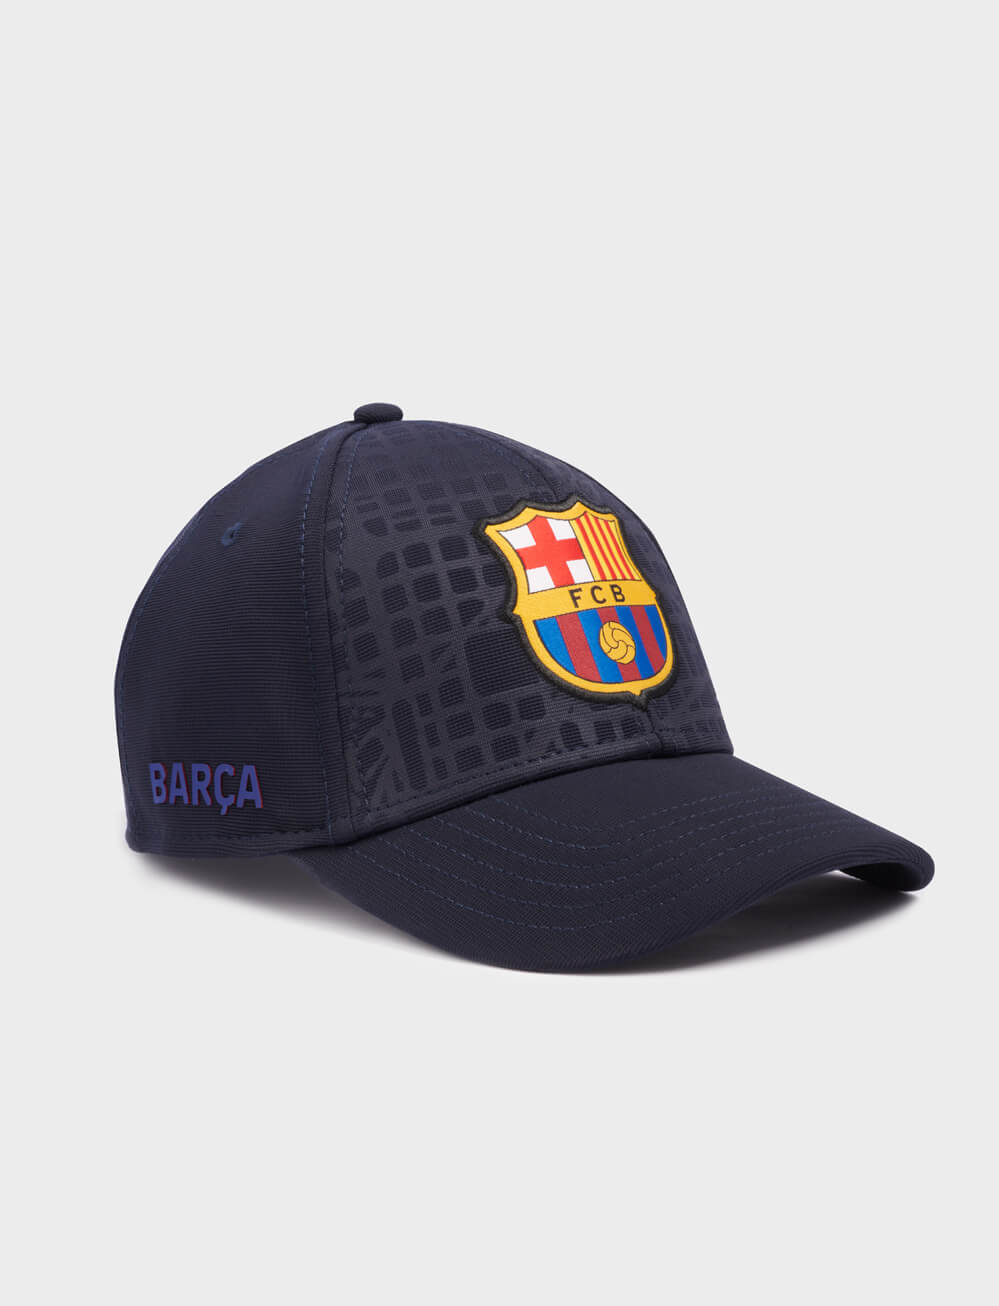 Official FC Barcelona Cap - Navy - The World Football Store